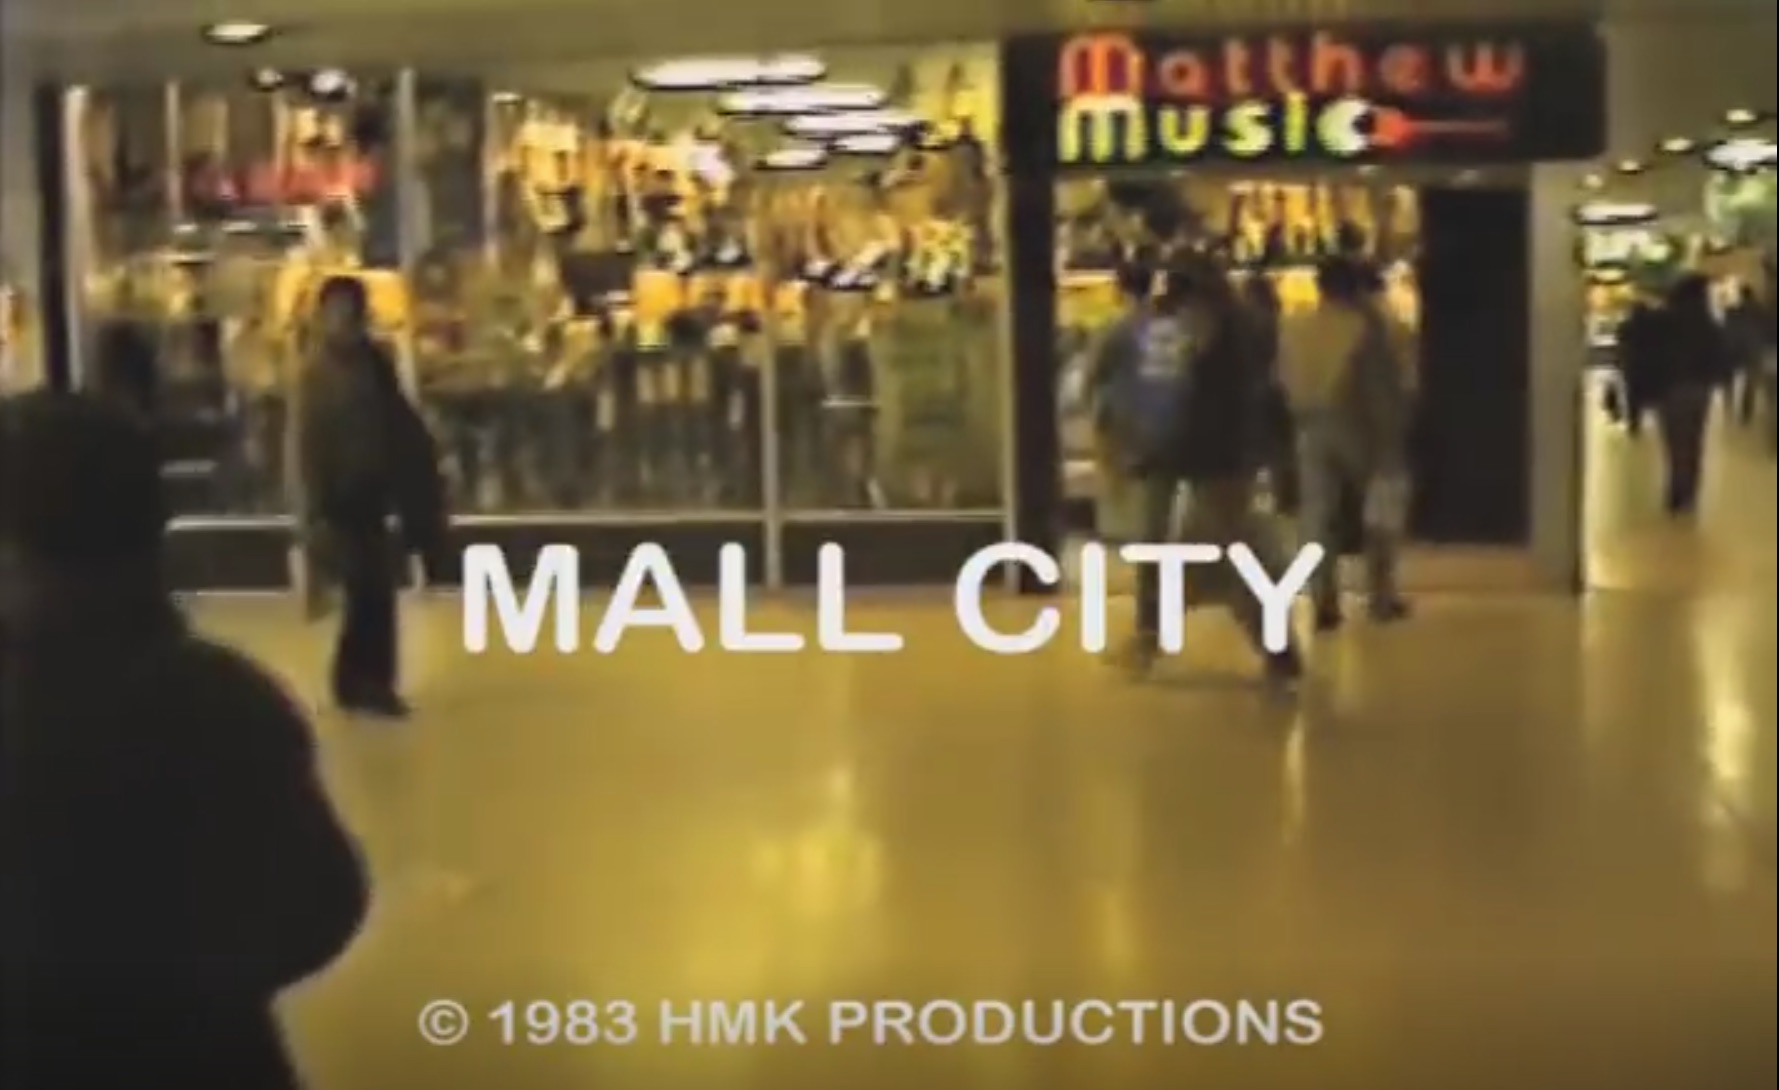 screenshot of the title credit screen from the 1983 video documentary "Mall City." It is a shot inside a Long Island shopping mall, with people walking in front of a store called Matthew Music. The title, "Mall City," reads in white lettering over the scene. Below that is the text "© 1983 HMK Productions"